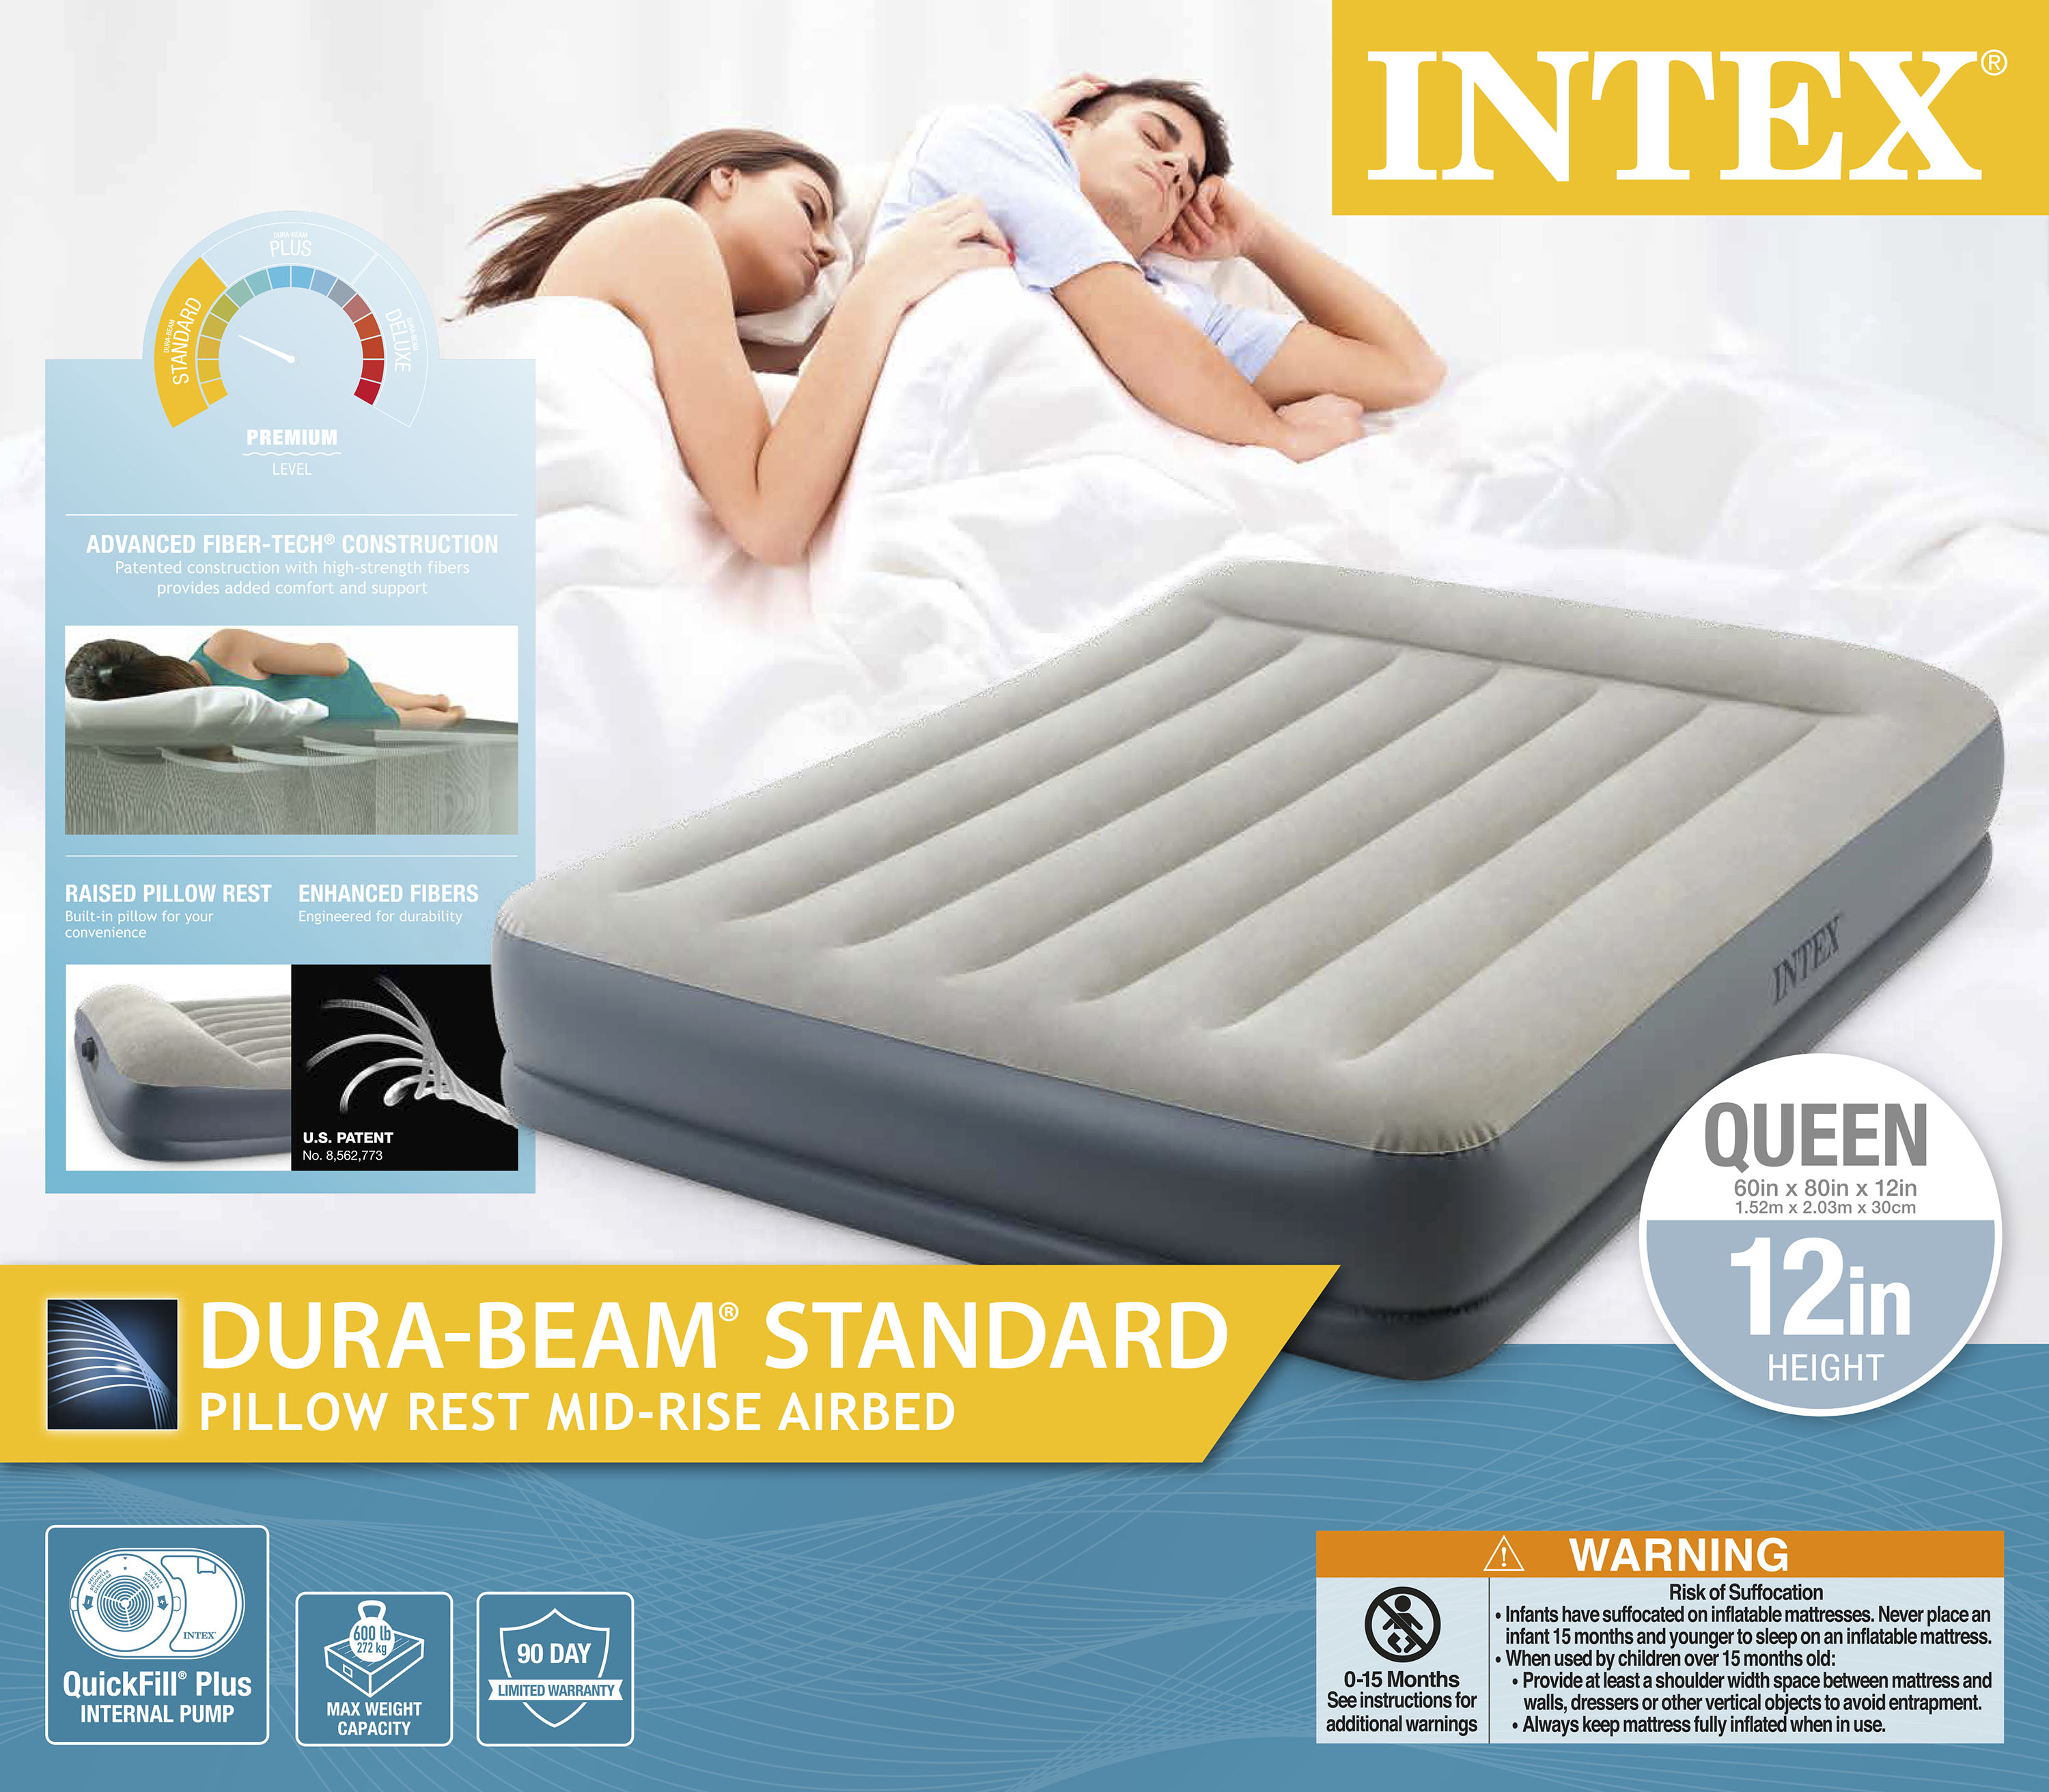 Intex Dura-Beam 12 inch Pillow Rest Mid-Rise Air Bed Mattress with Built-in Pump, Queen - image 2 of 13